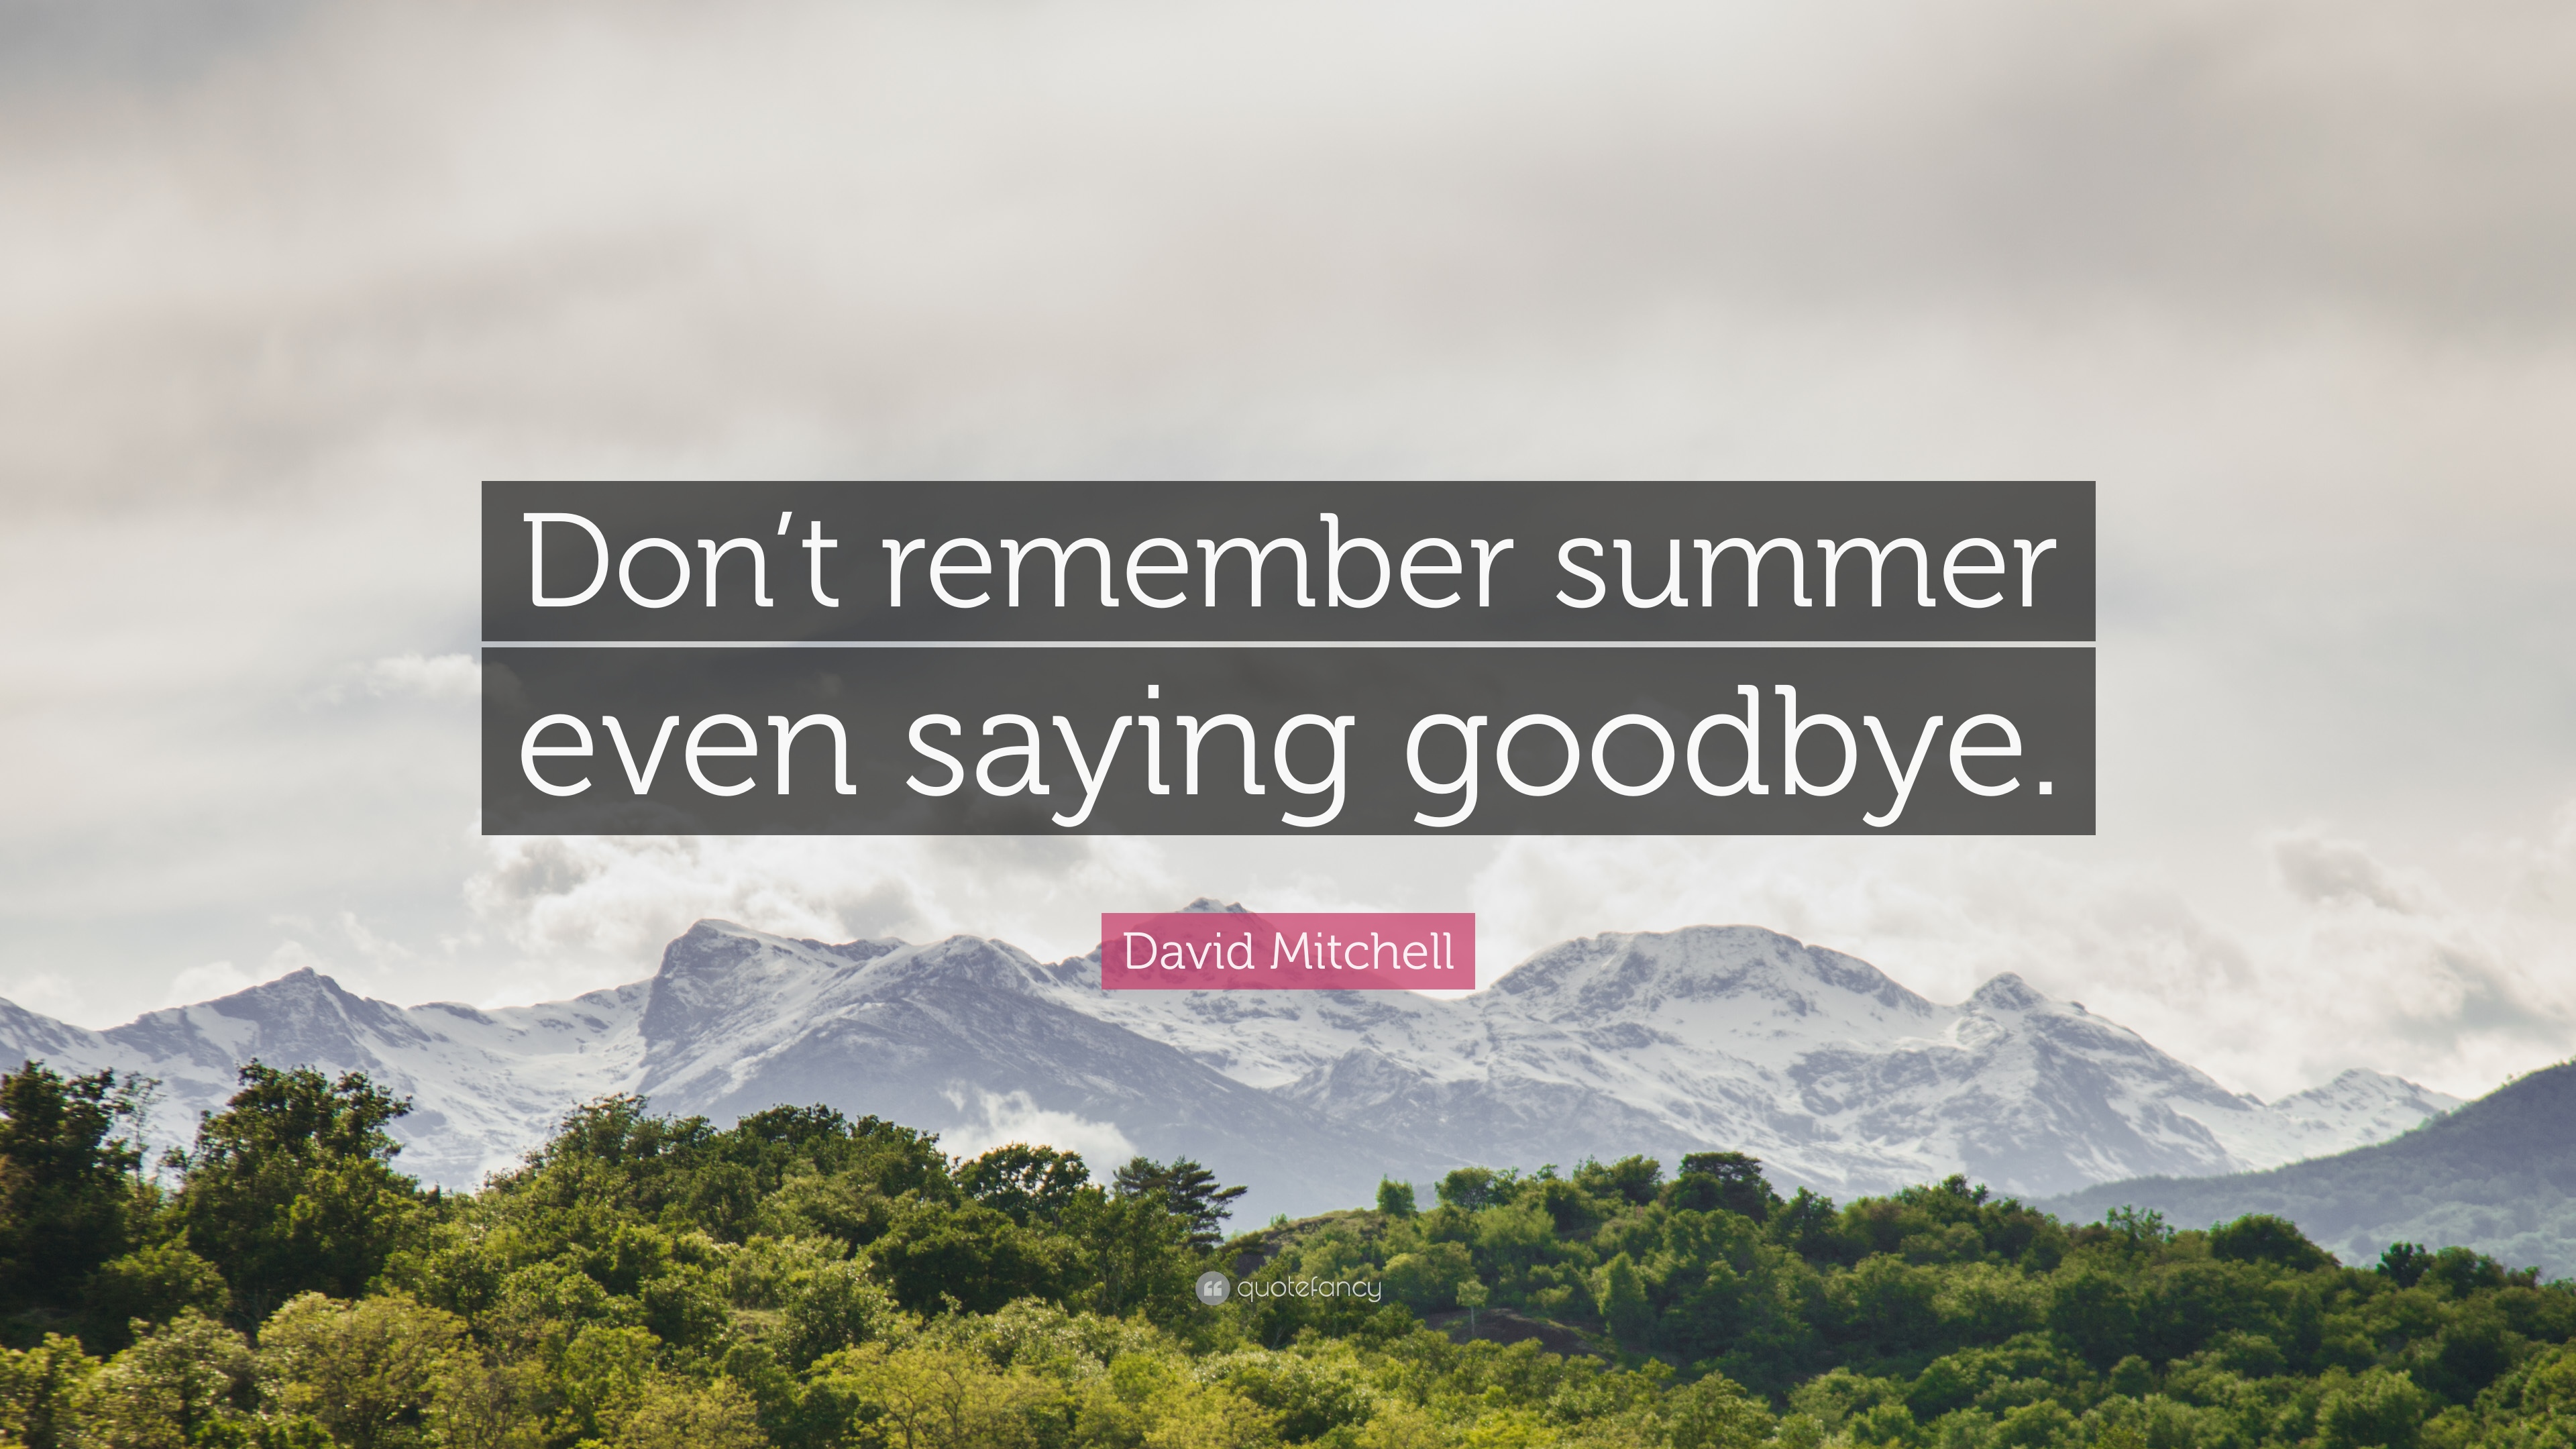 David Mitchell Quote: “Don't remember summer even saying goodbye